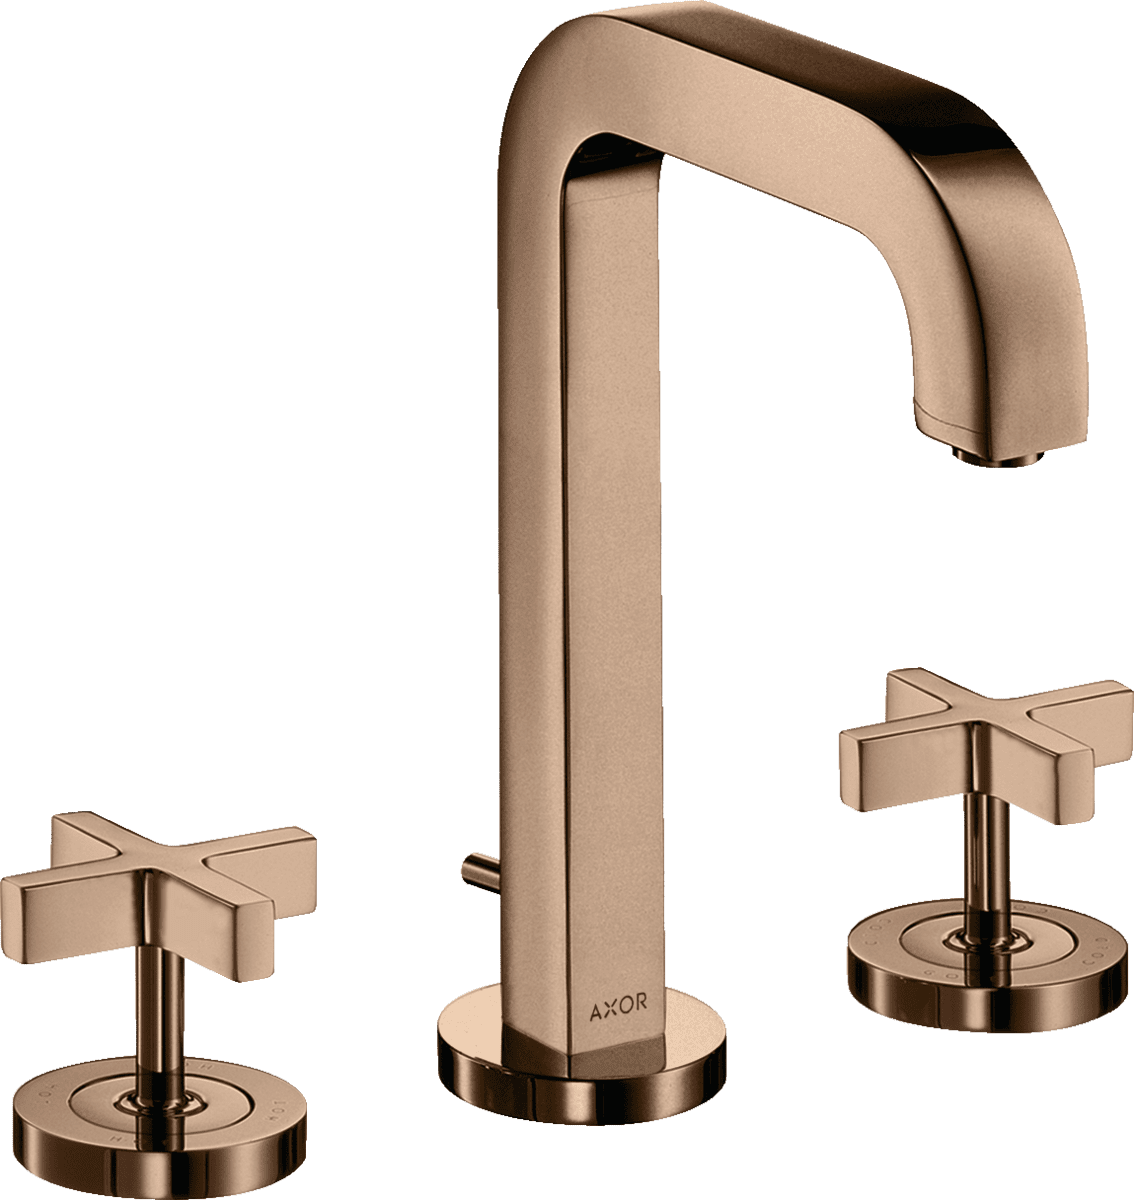 Picture of HANSGROHE AXOR Citterio 3-hole basin mixer 170 with spout 140 mm, cross handles, escutcheons and pop-up waste set #39133300 - Polished Red Gold